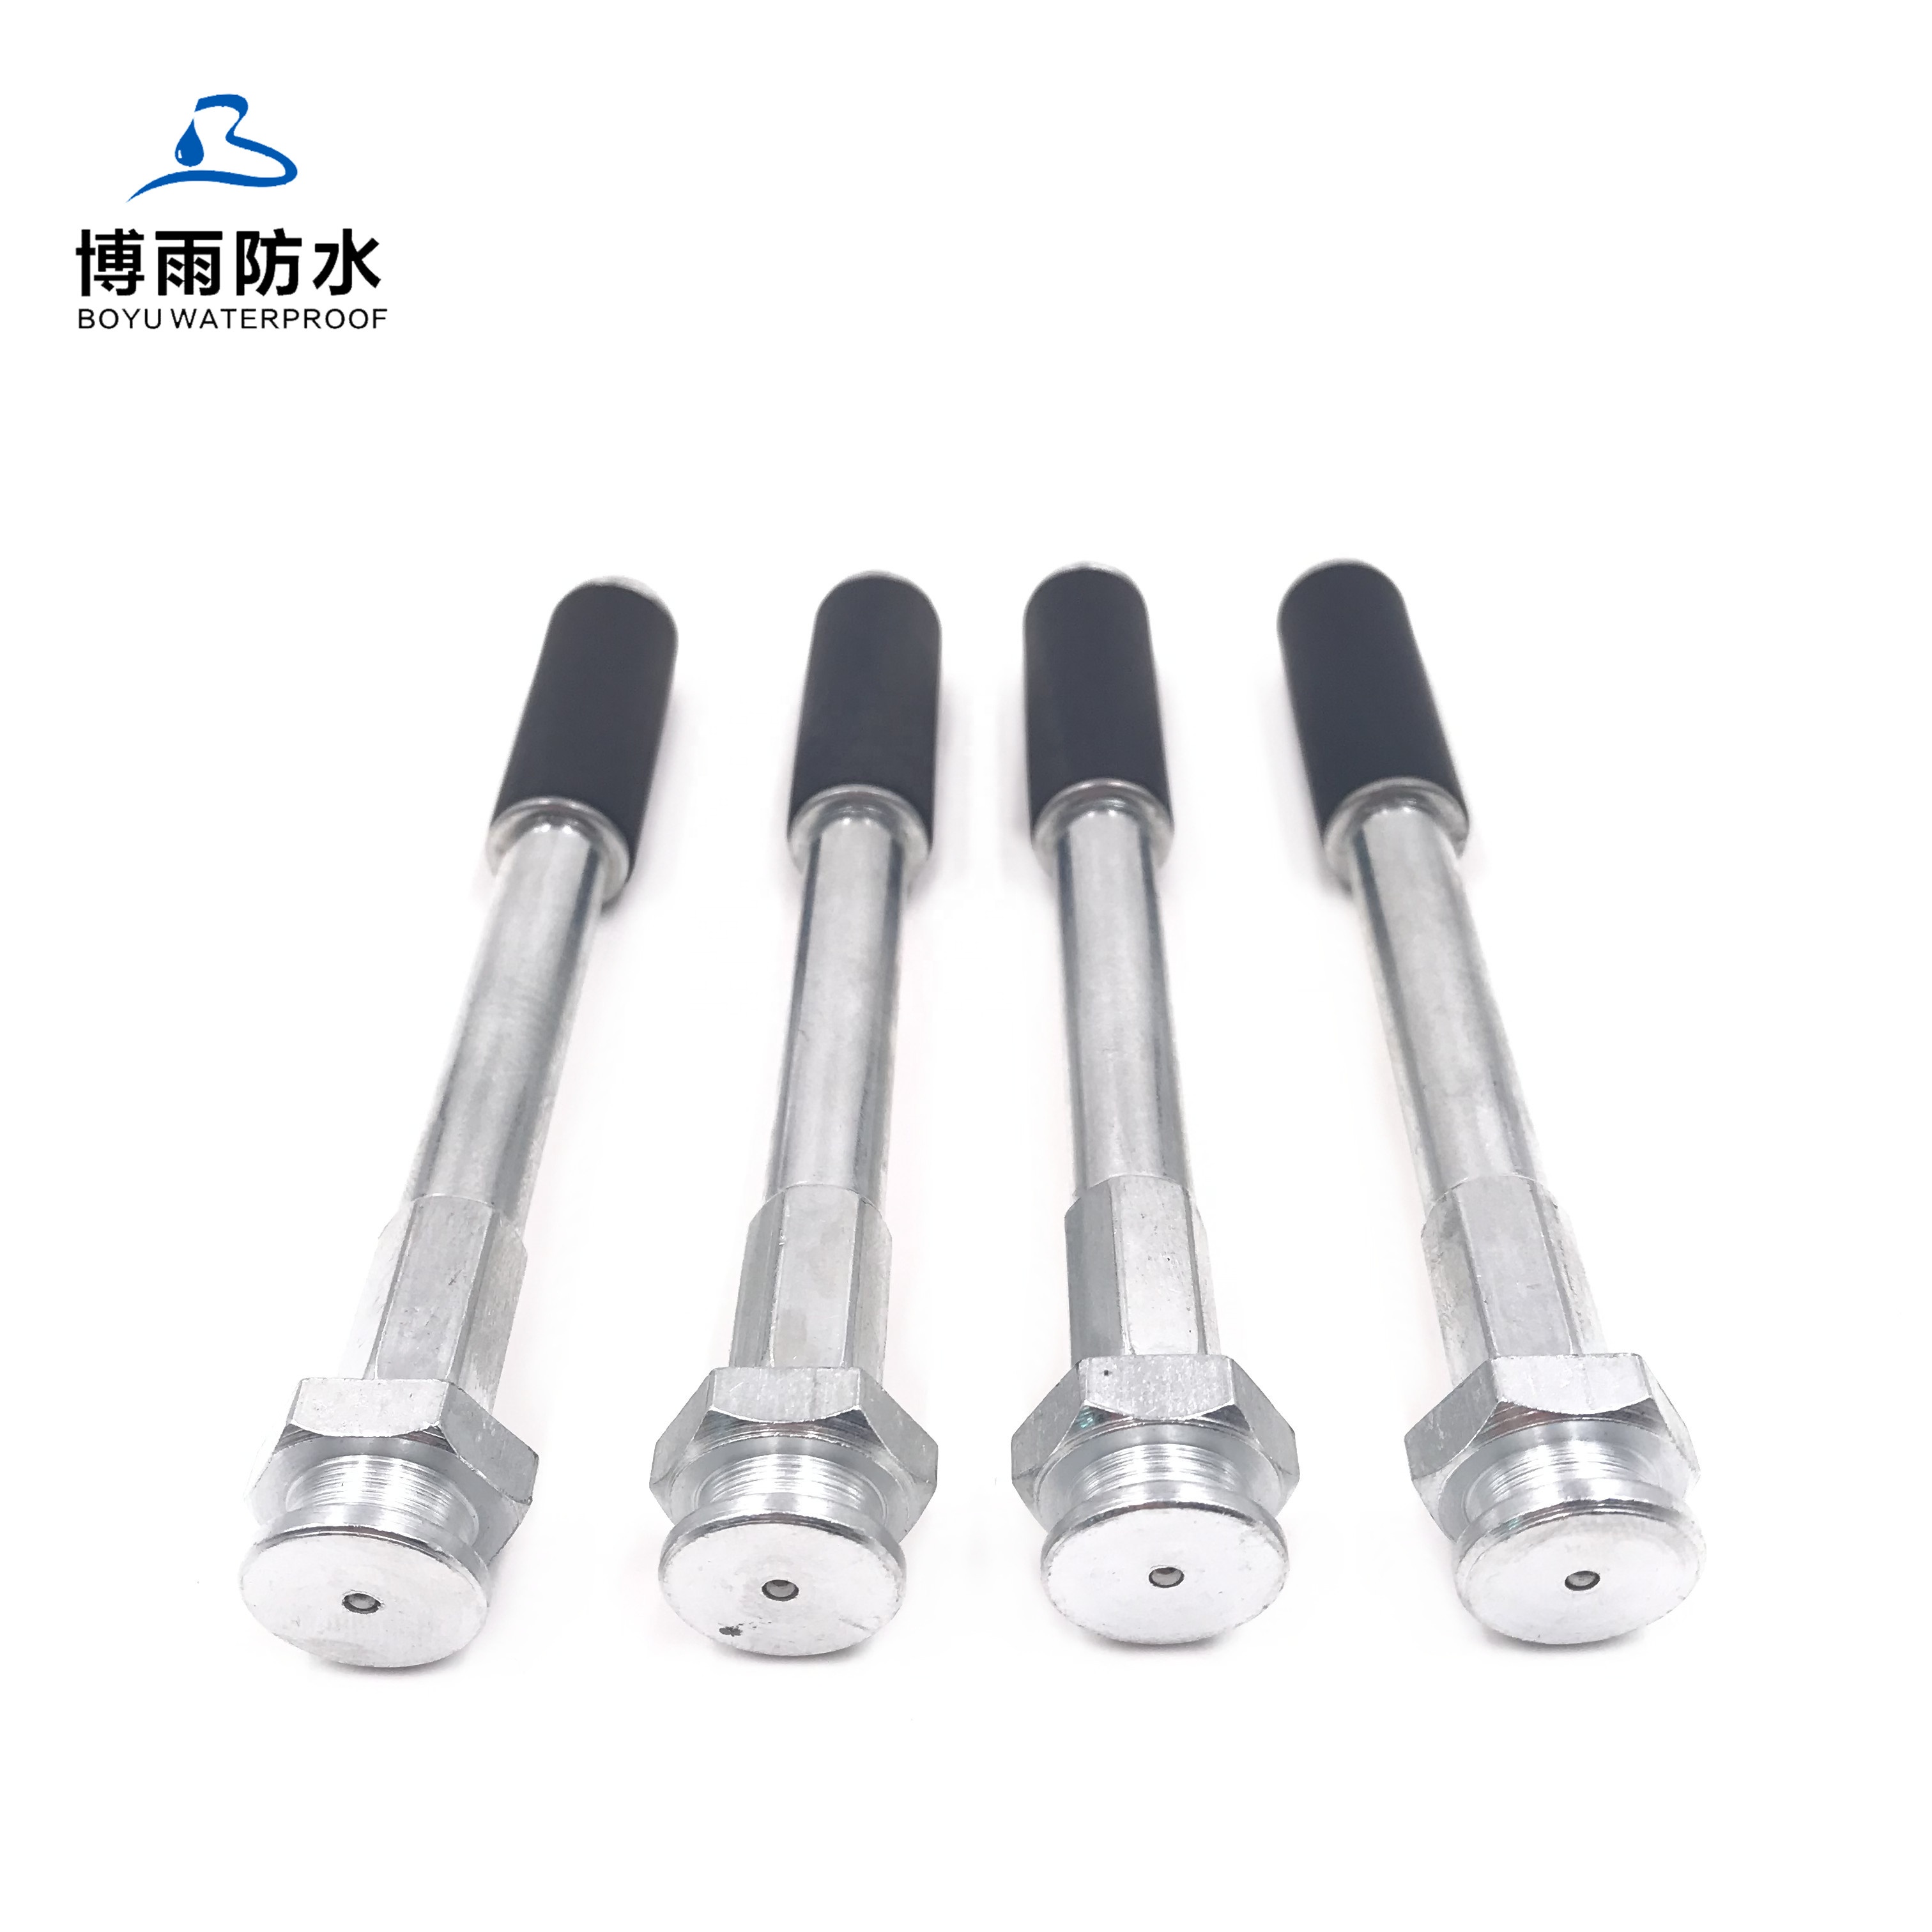 Manufactur standard Metal Injection Packer - Flat Head nipple M6 Injection Packers steel 13*100mm China factory customize design – Boyu